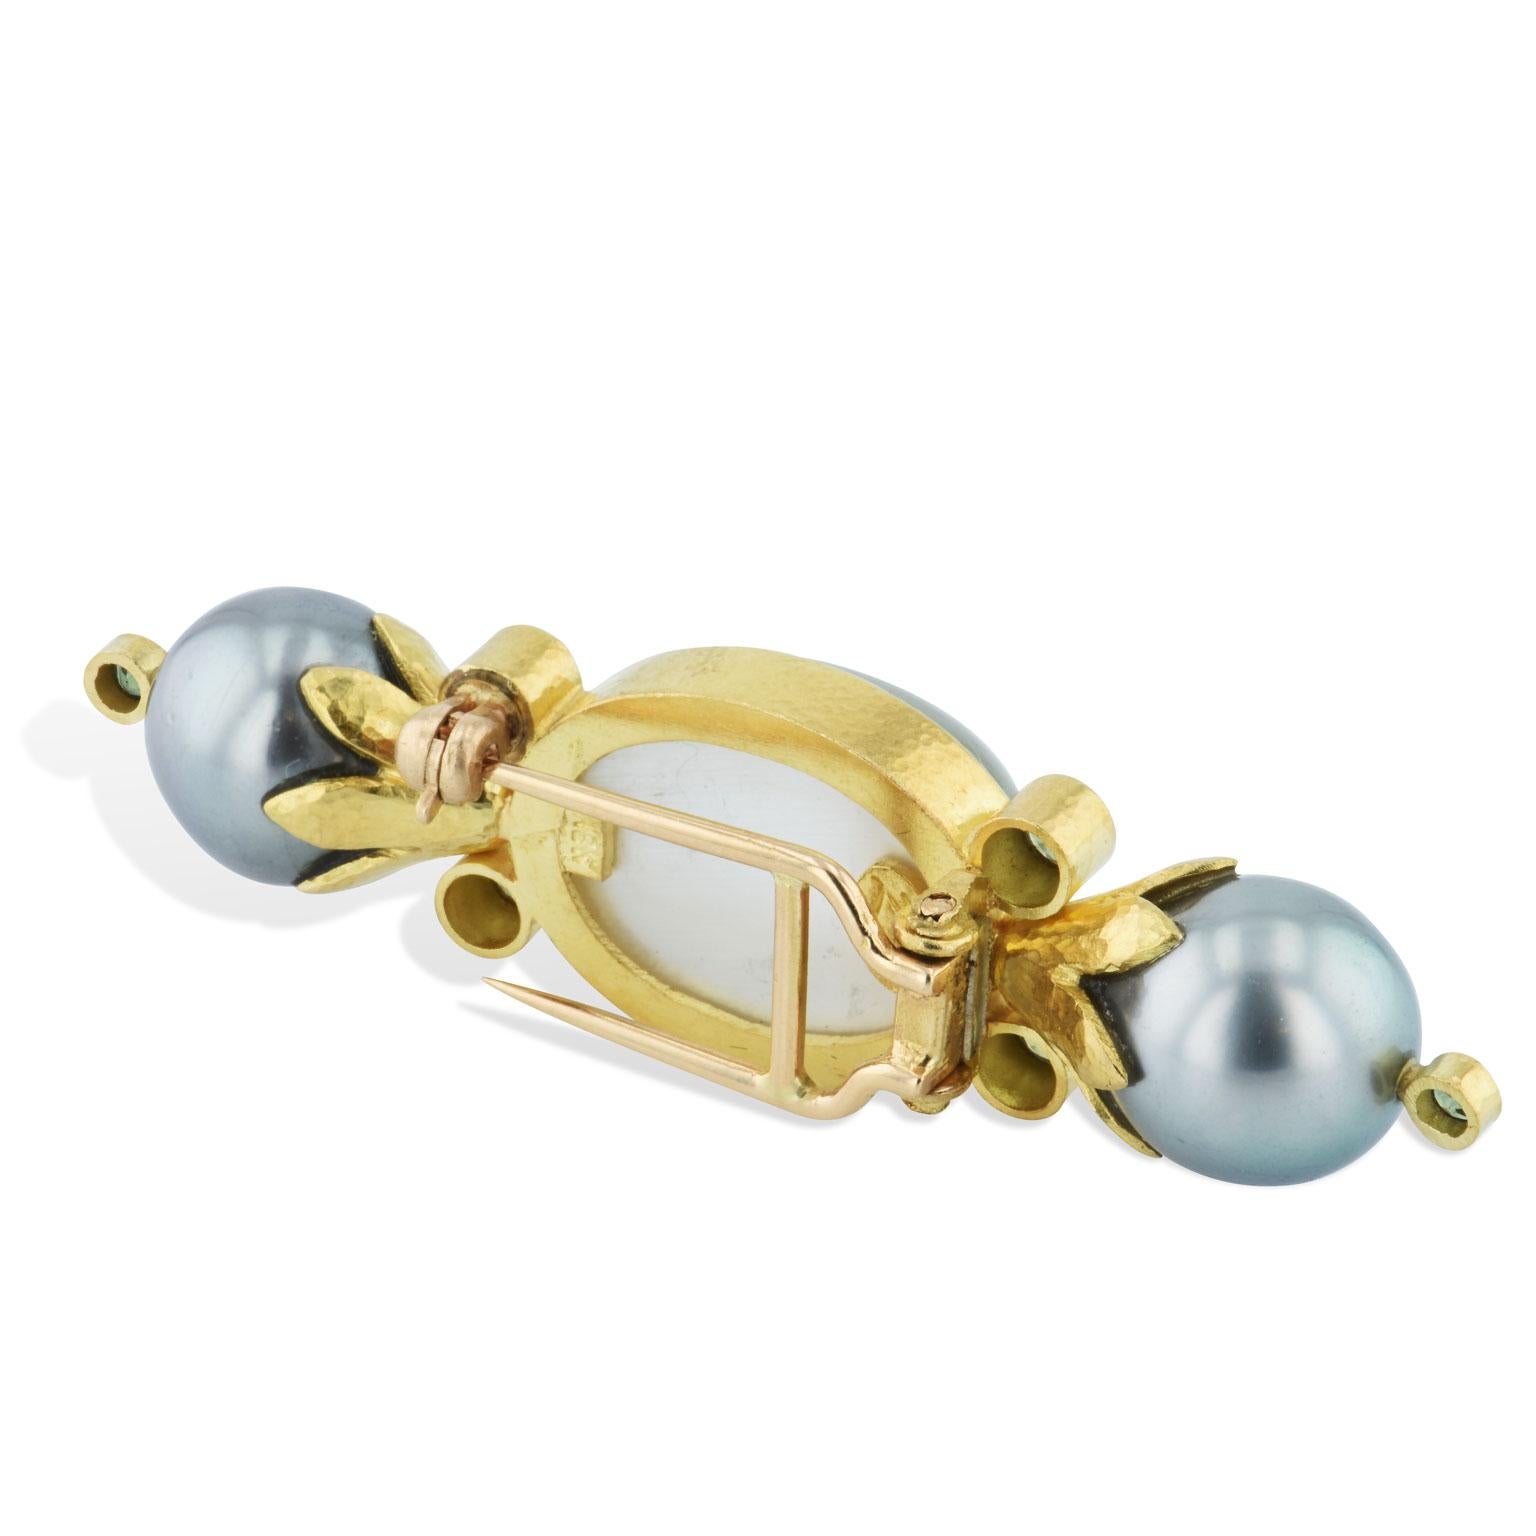 Feminine, strong and ethereal, this previously loved Elizabeth Locke 18 karat yellow gold pin features six green tourmaline punctuated between two Tahitian pearls and one green quartz. Backed in mother of pearl, this piece will live her breathless